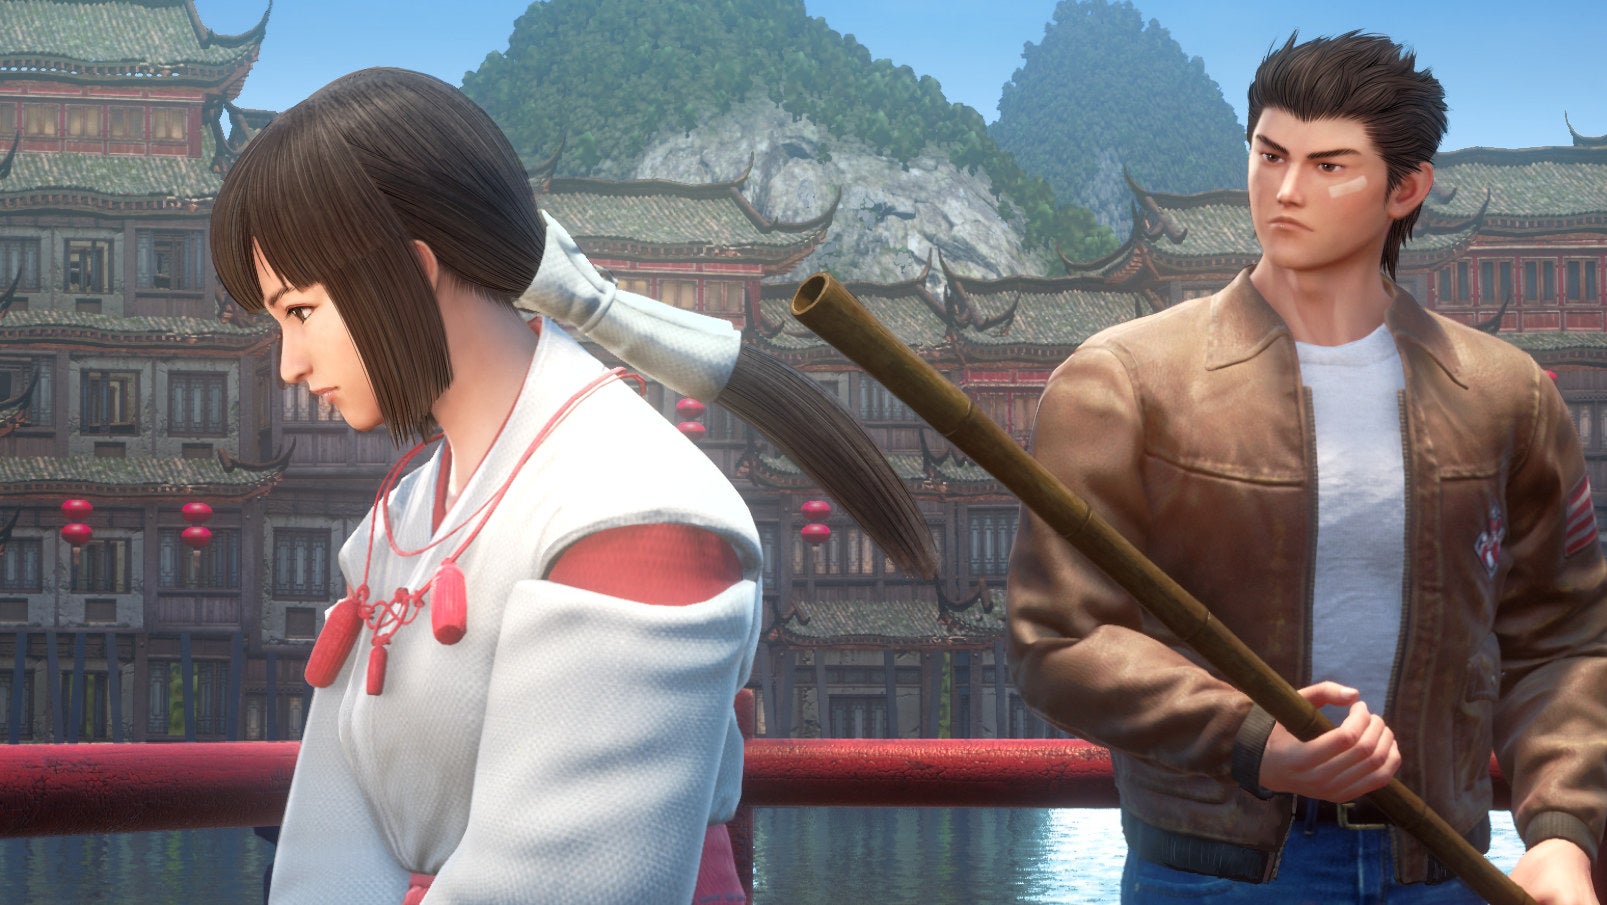 Image for Shenmue 3 release date announced for August 2019